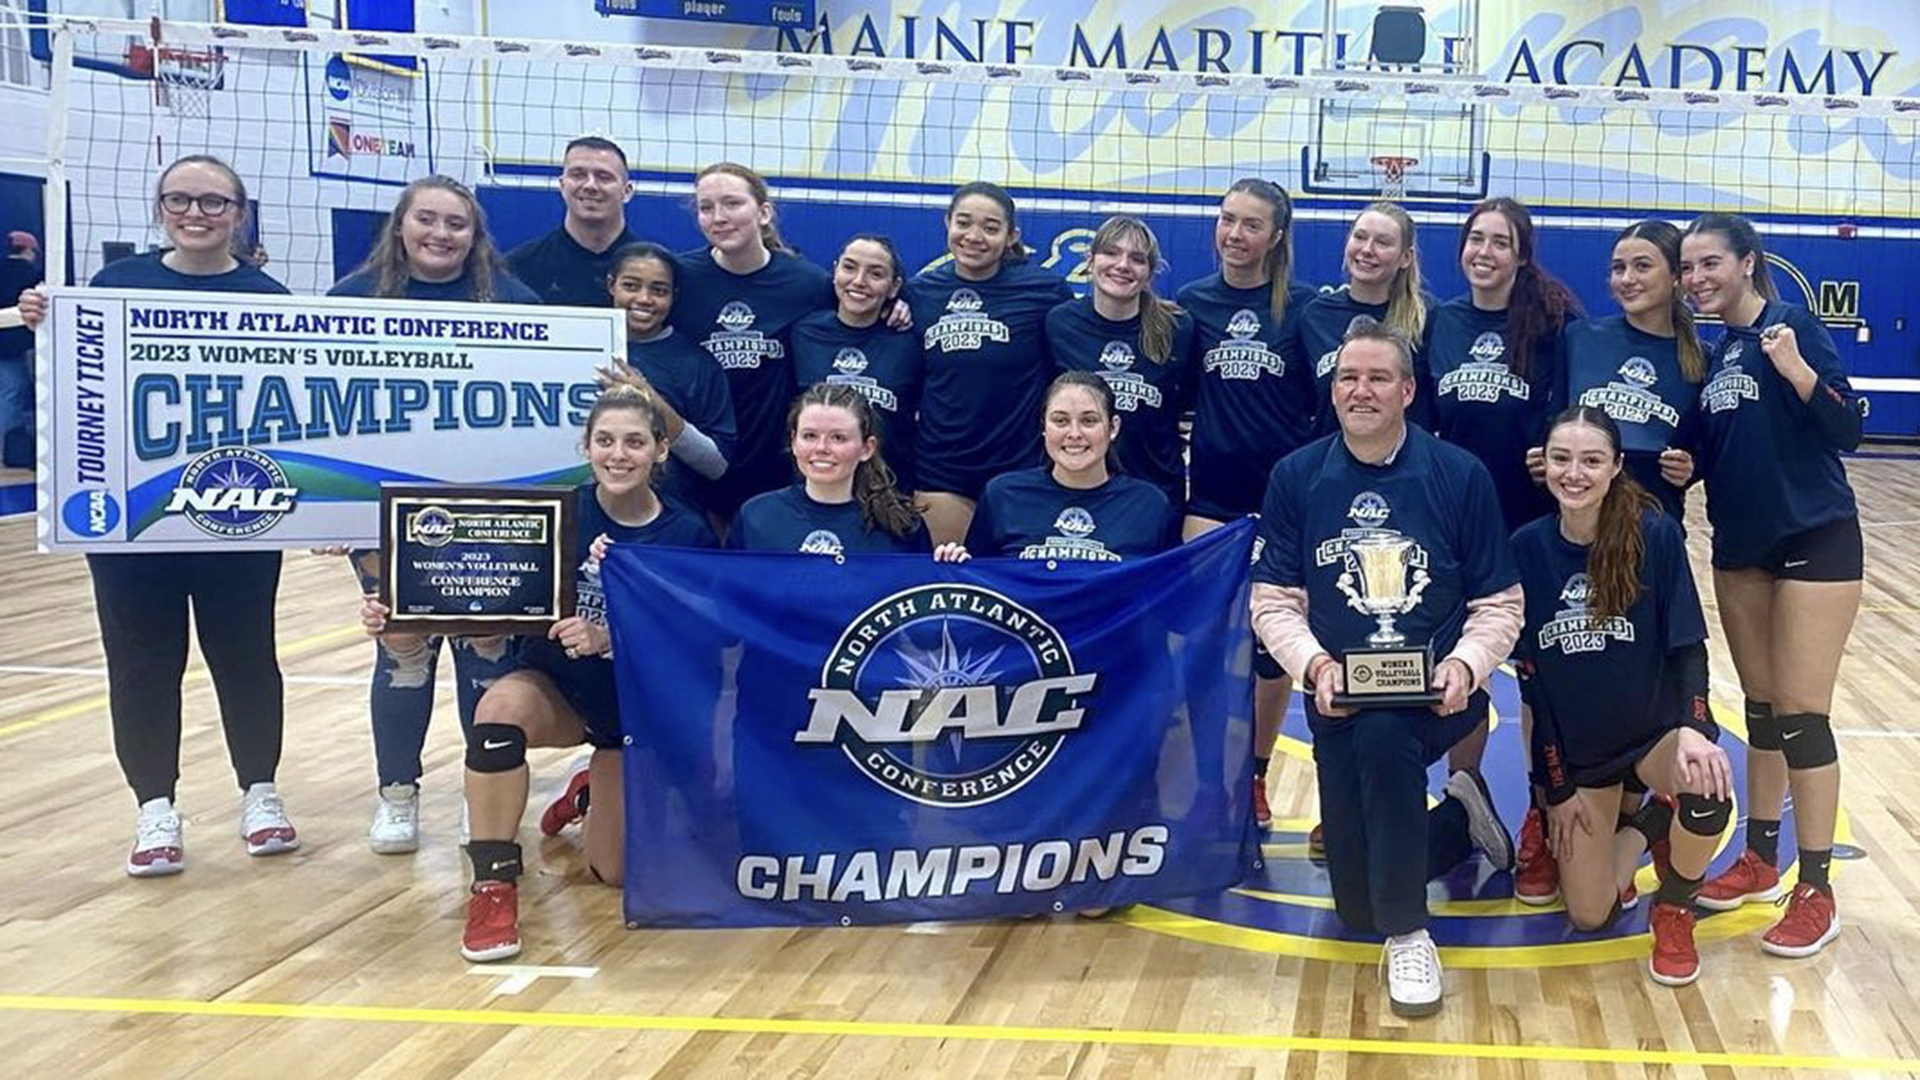 CH4MPS: Women’s Volleyball Rallies to Clinch North Atlantic Conference Crown, Edges Maine Maritime 3-2